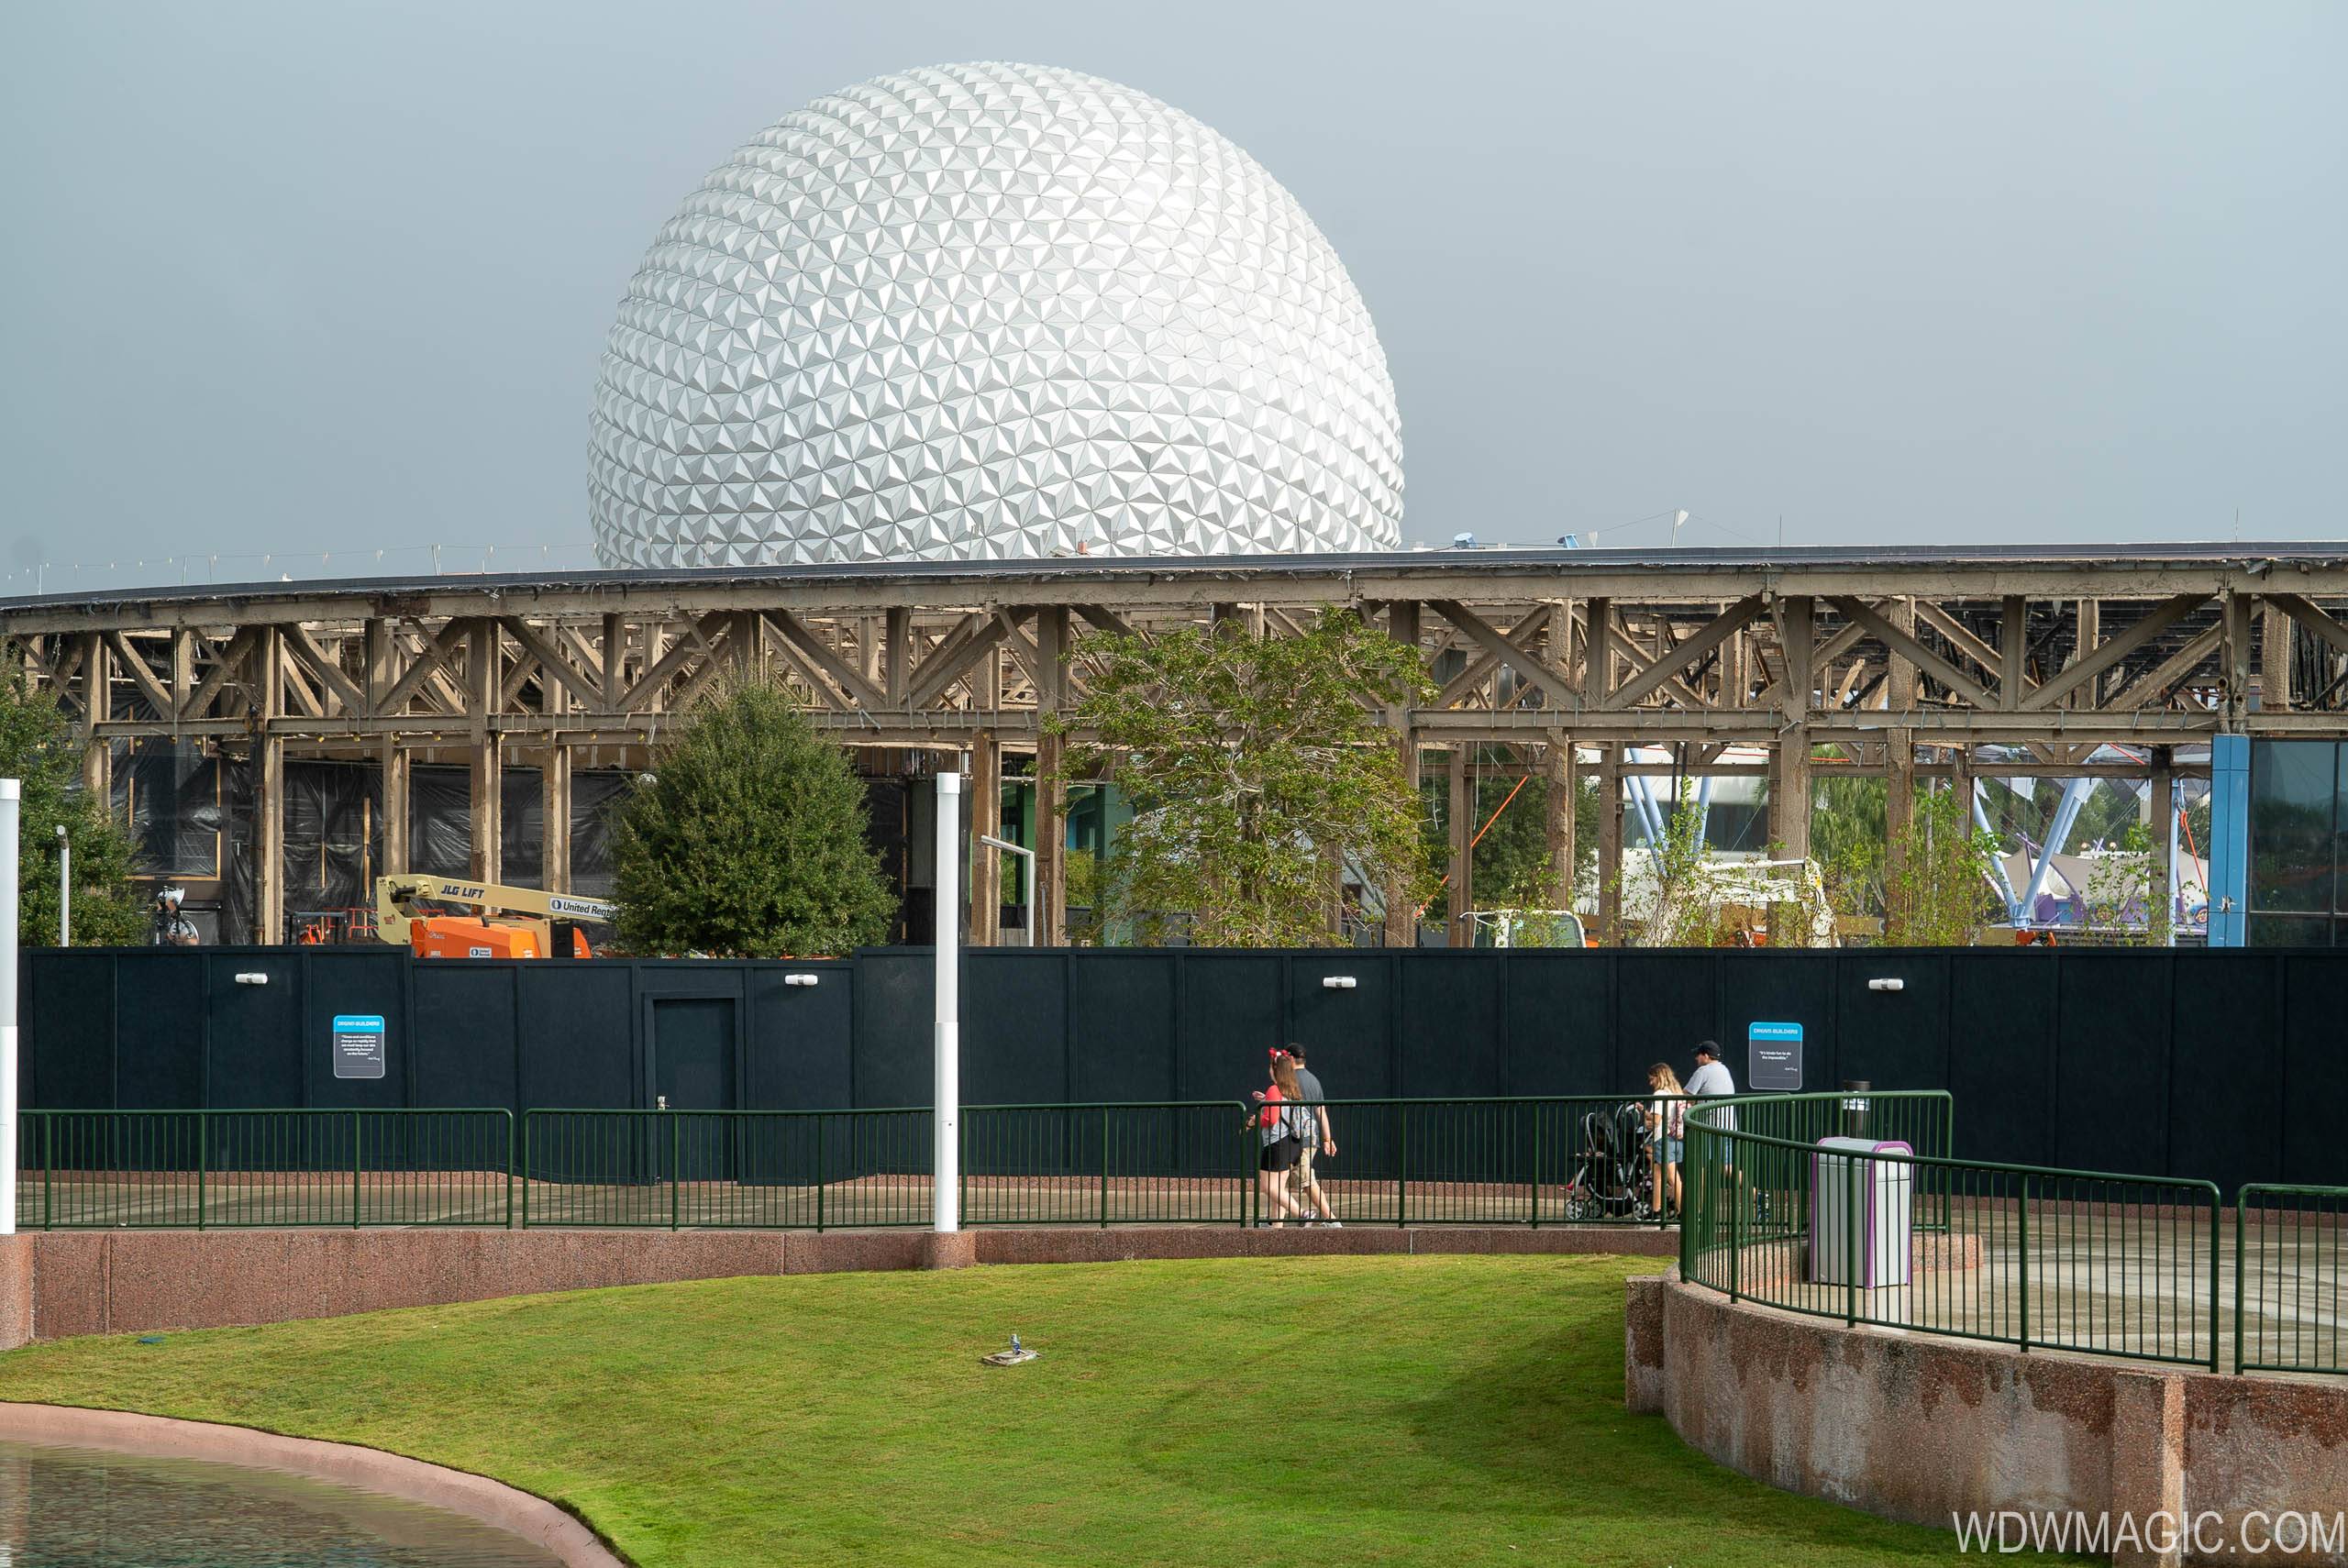 Epcot Future World West Demolition and Construction Walls - December 12 2019